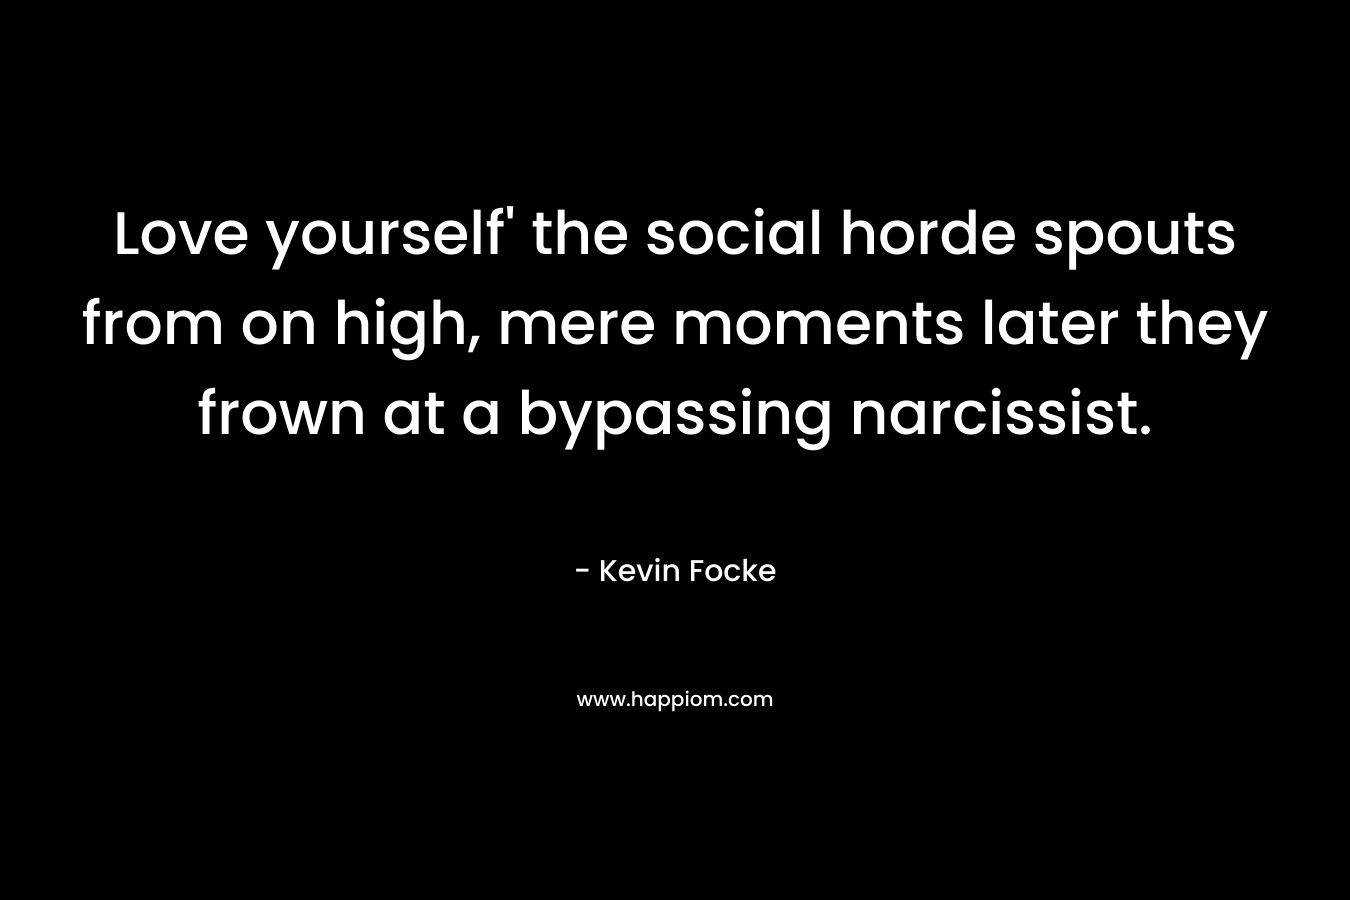 Love yourself’ the social horde spouts from on high, mere moments later they frown at a bypassing narcissist. – Kevin Focke